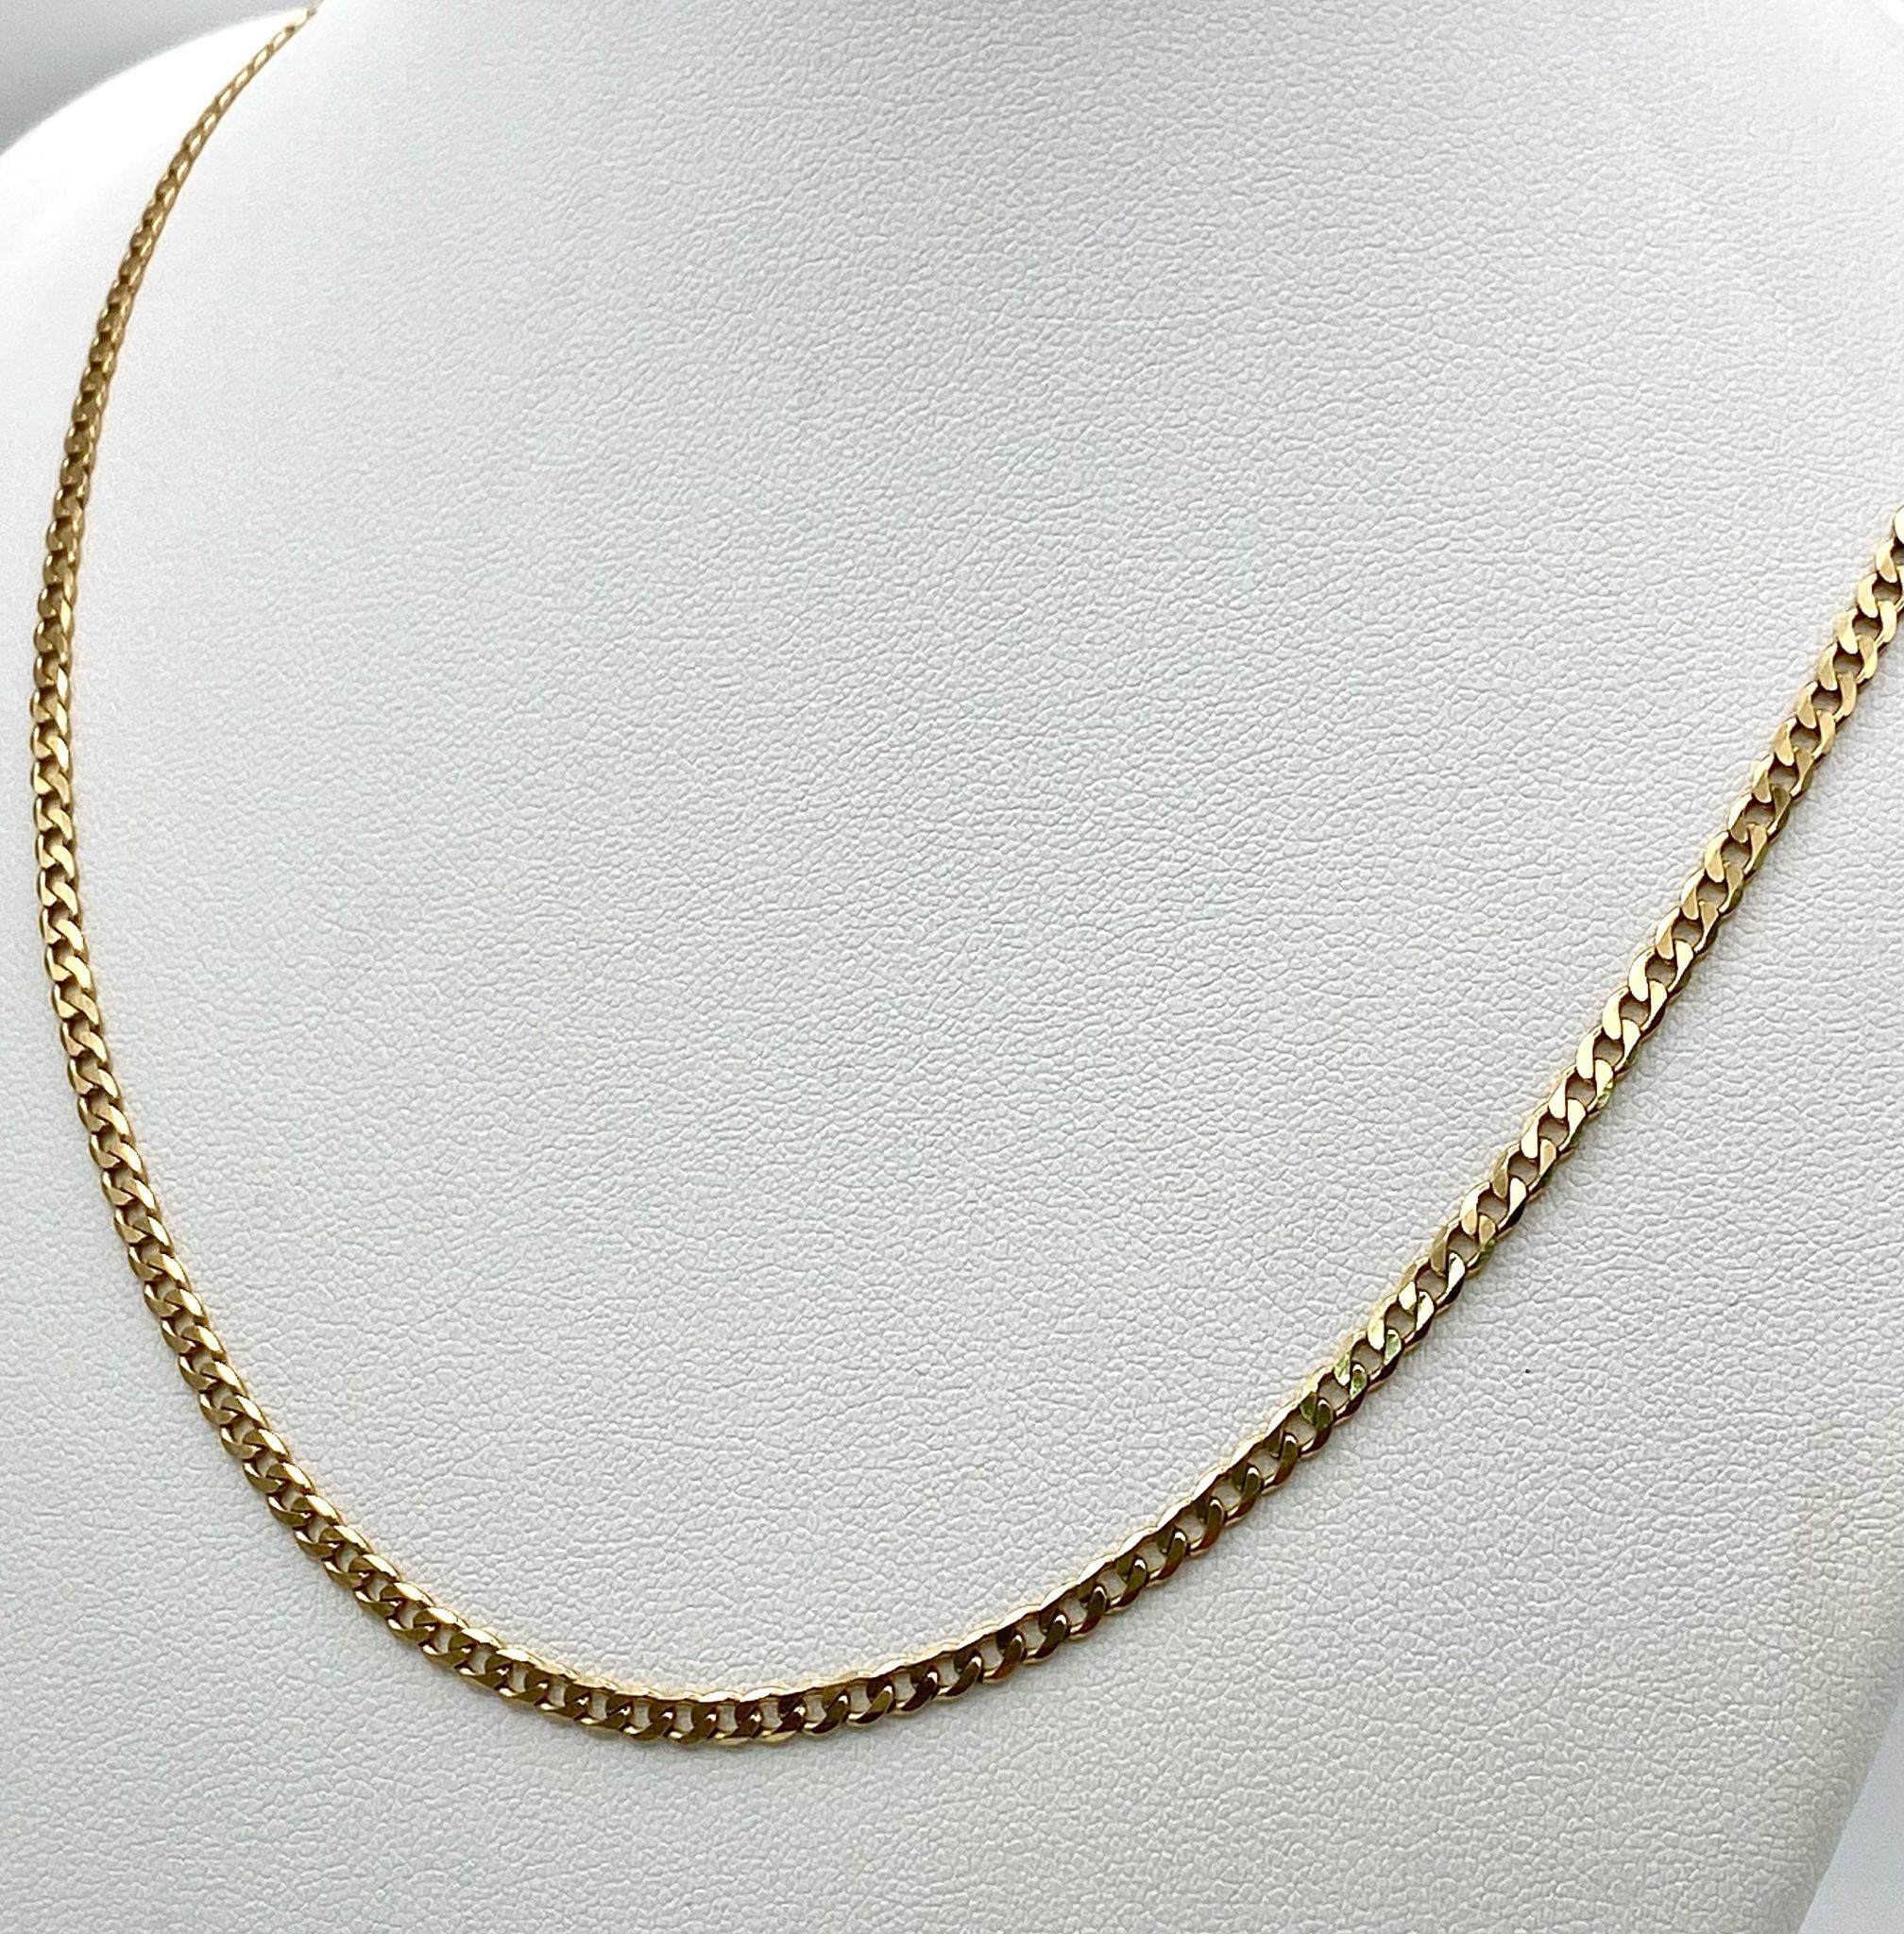 A 9K Yellow Gold Flat Curb Link Chain/Necklace. 54cm length. 8.5g weight. - Image 3 of 5